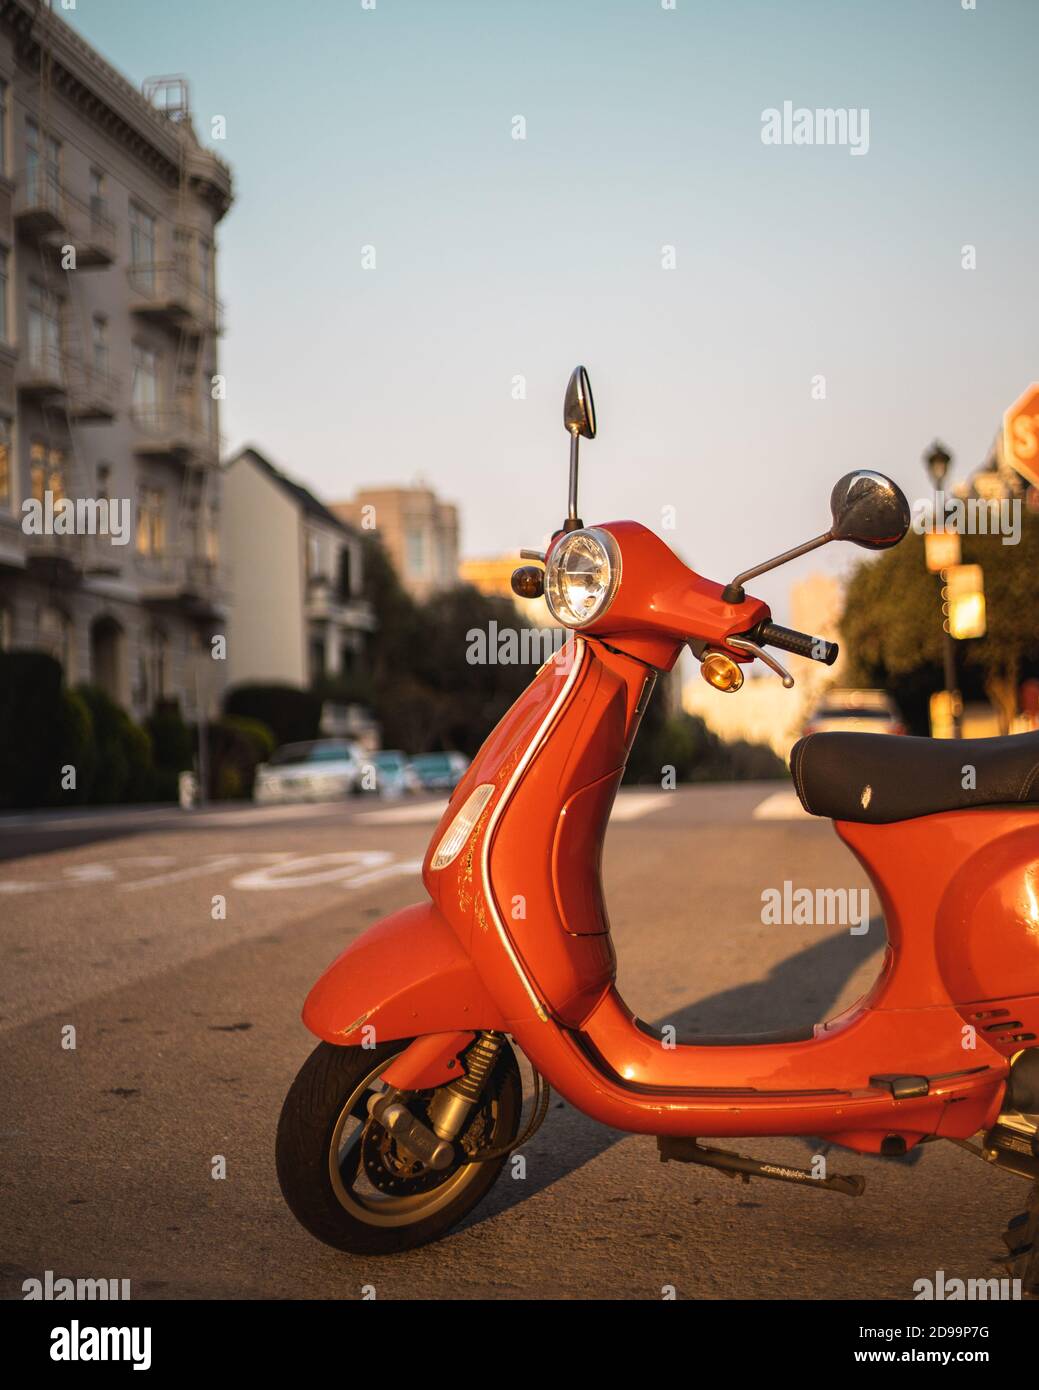 Vespa scooter downtown Stock Photo